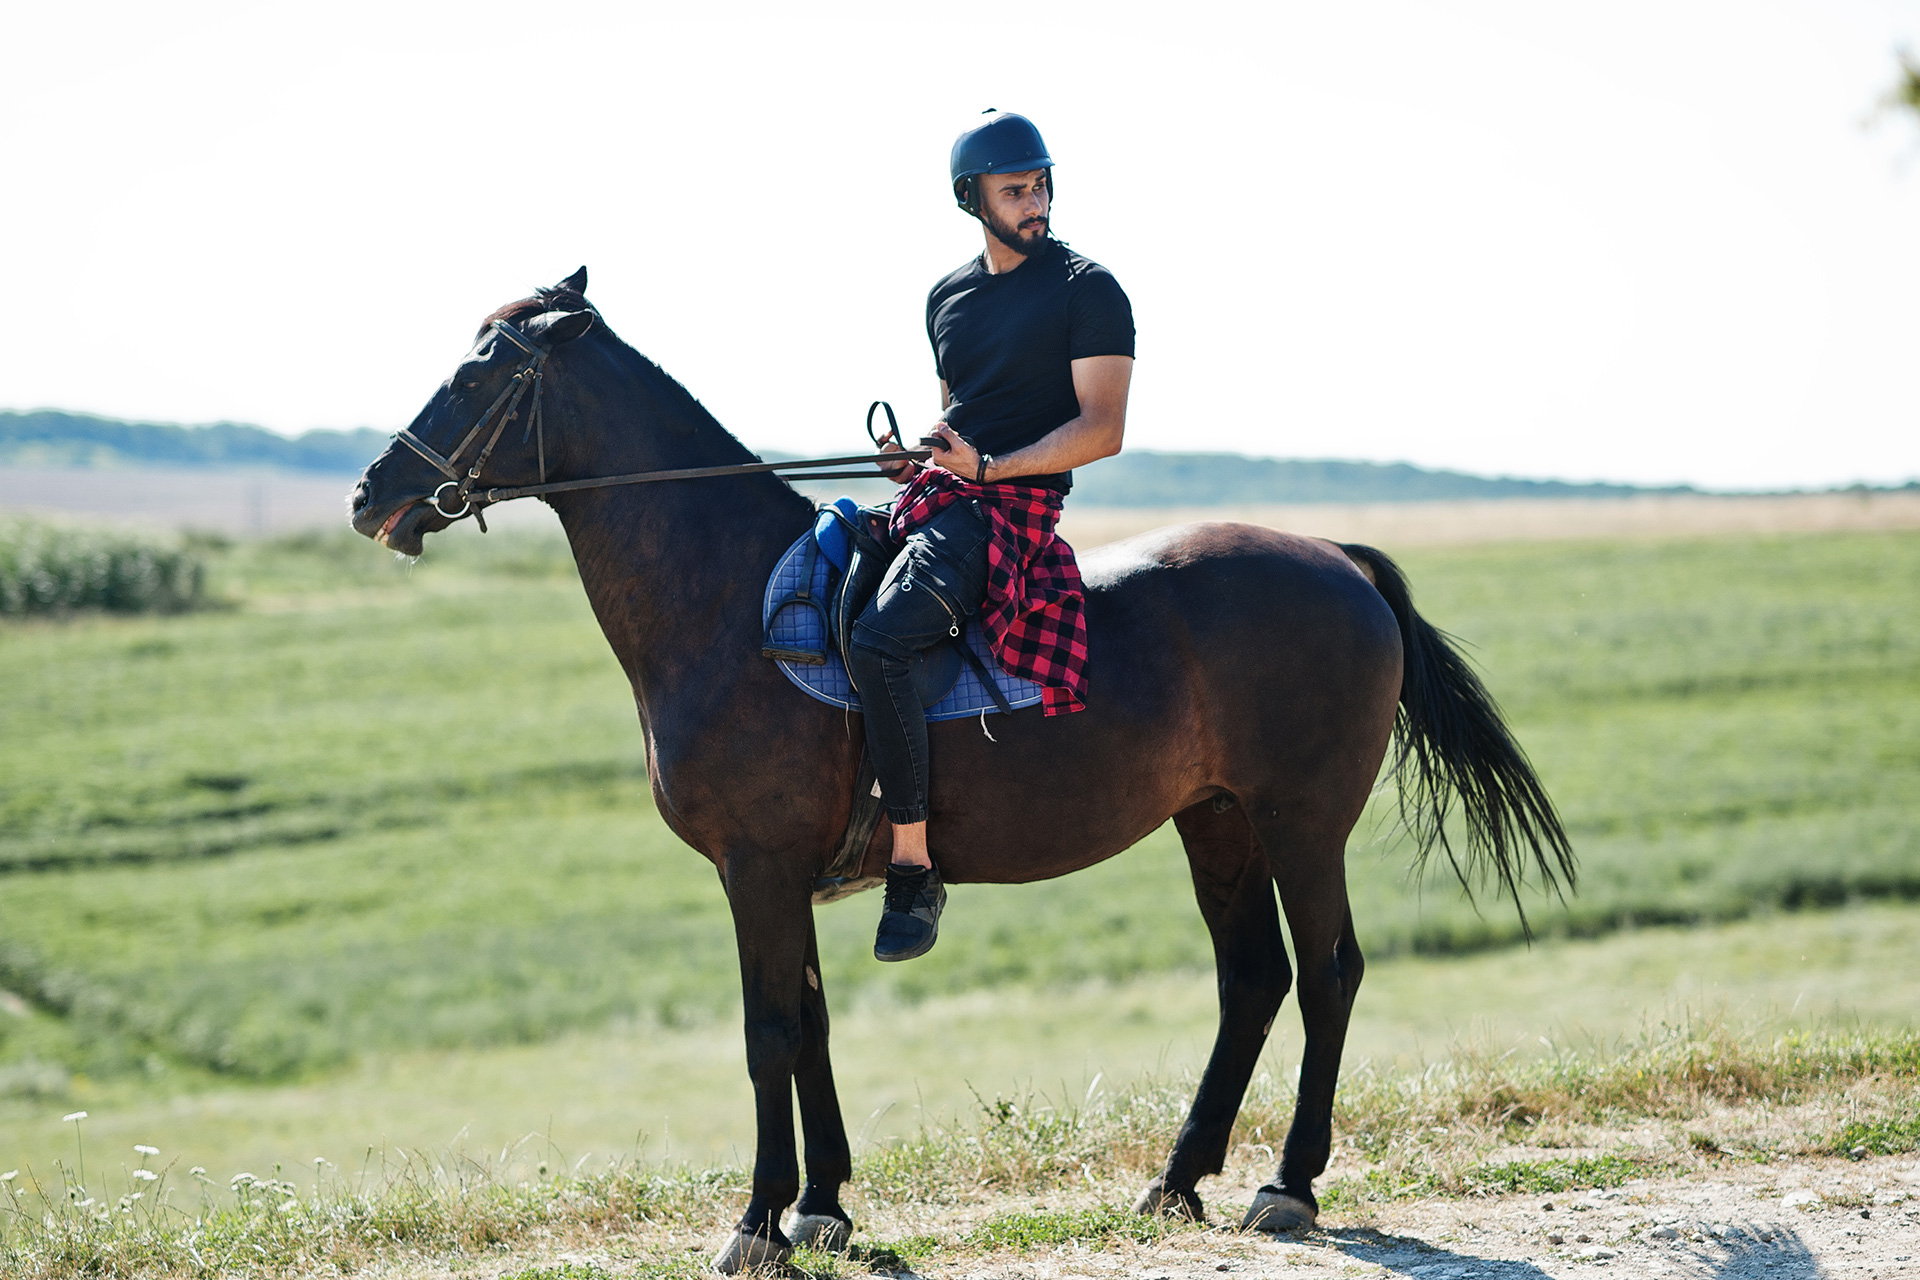 5 Common Mistakes Horse Riders Make